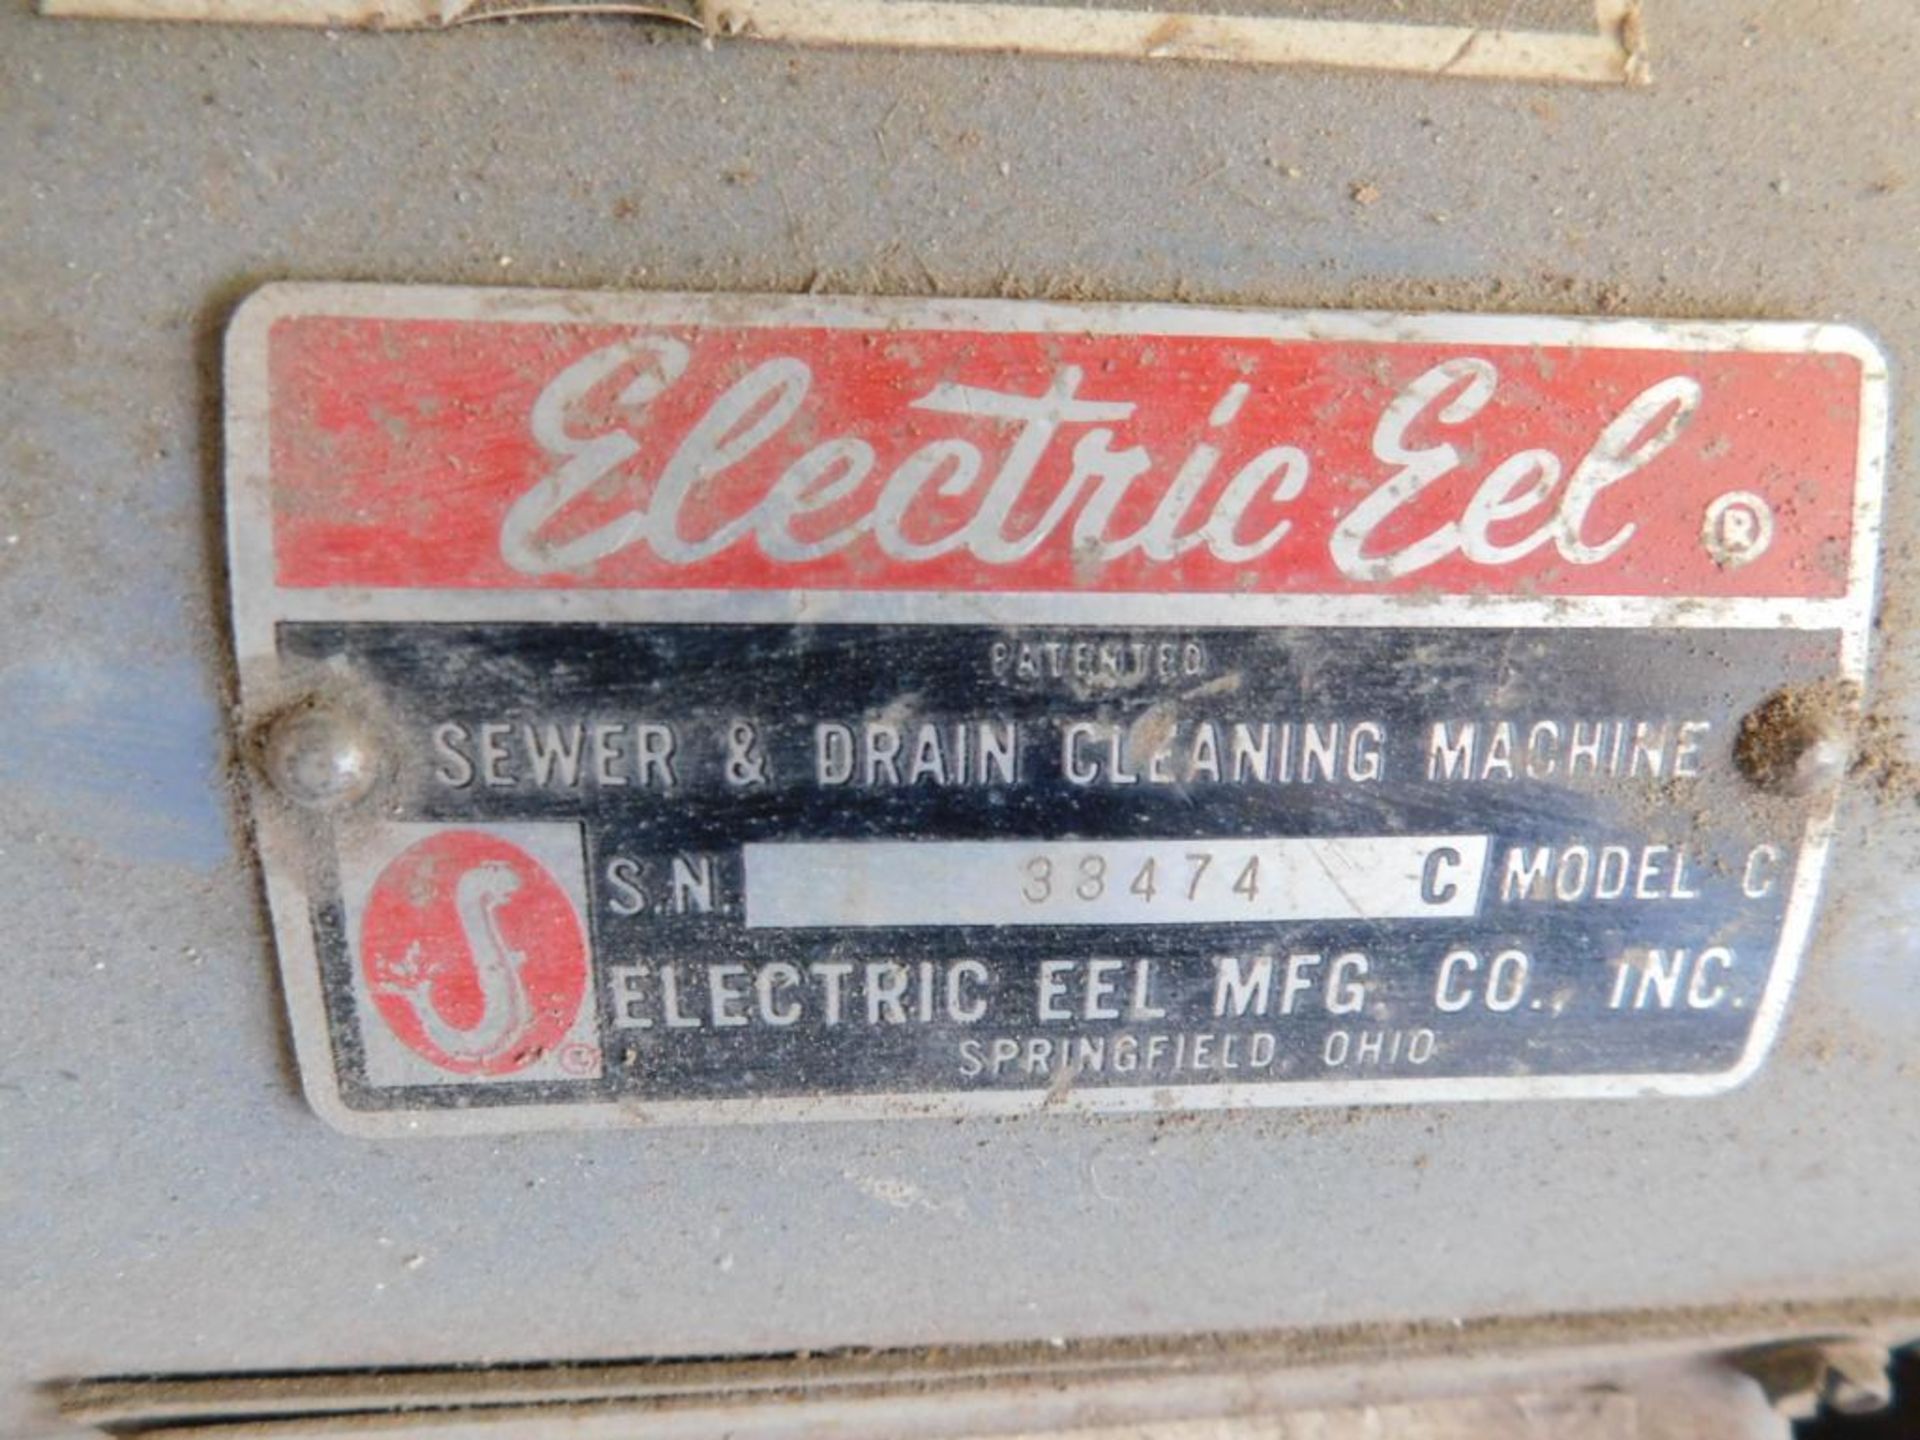 Electric Eel Model C Sewer & Drain Cleaning Machine, 1/2 HP, w/Accessories - Image 4 of 4